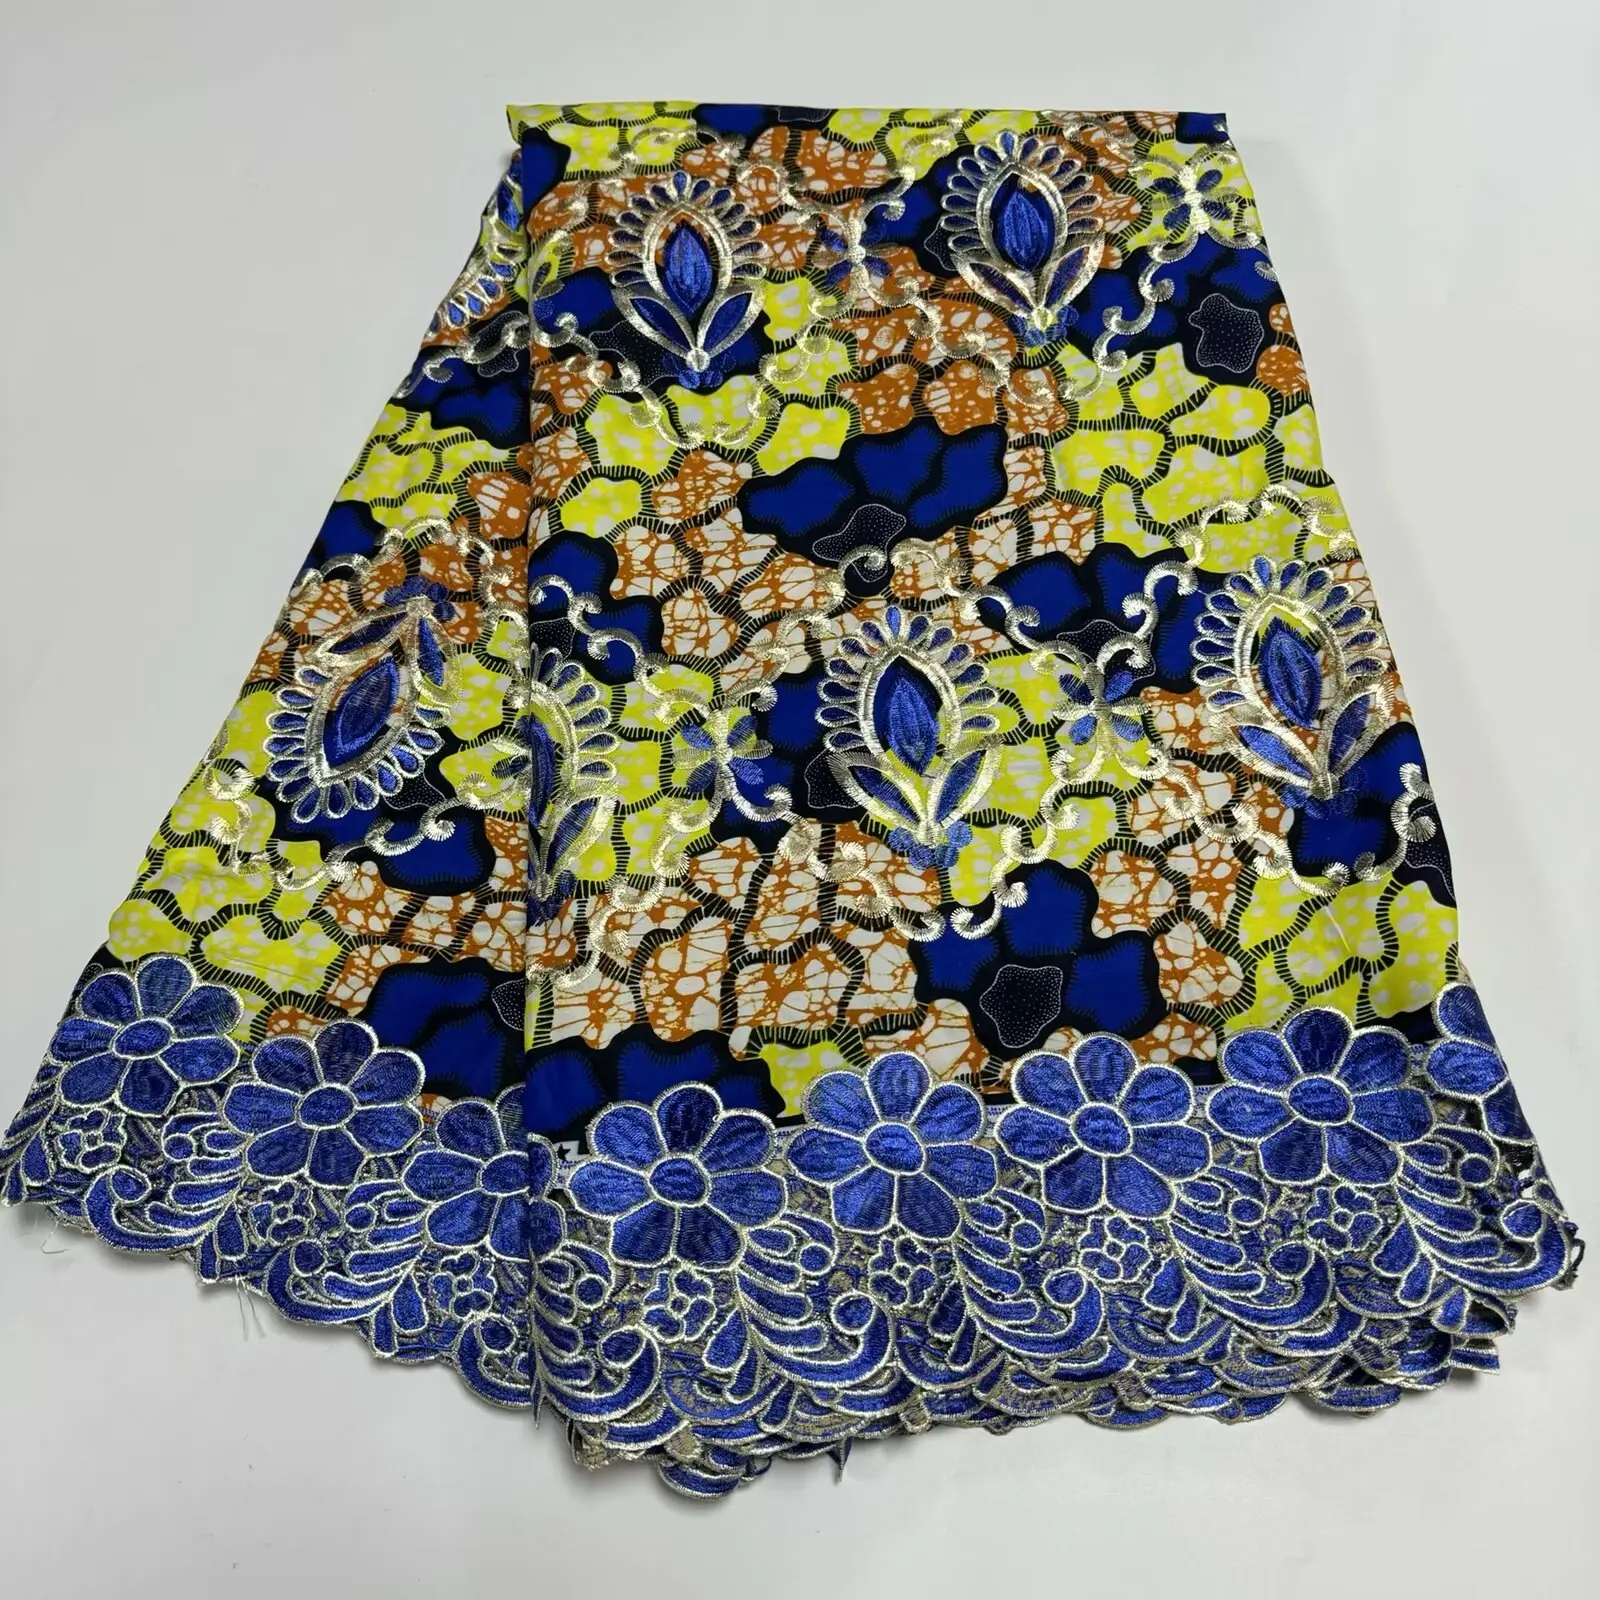 

100% Cotton African Wax Prints Fabric Cord Lace Guipure Embroidered Wax Tissu For Women Dress High Quality, 6 Yards